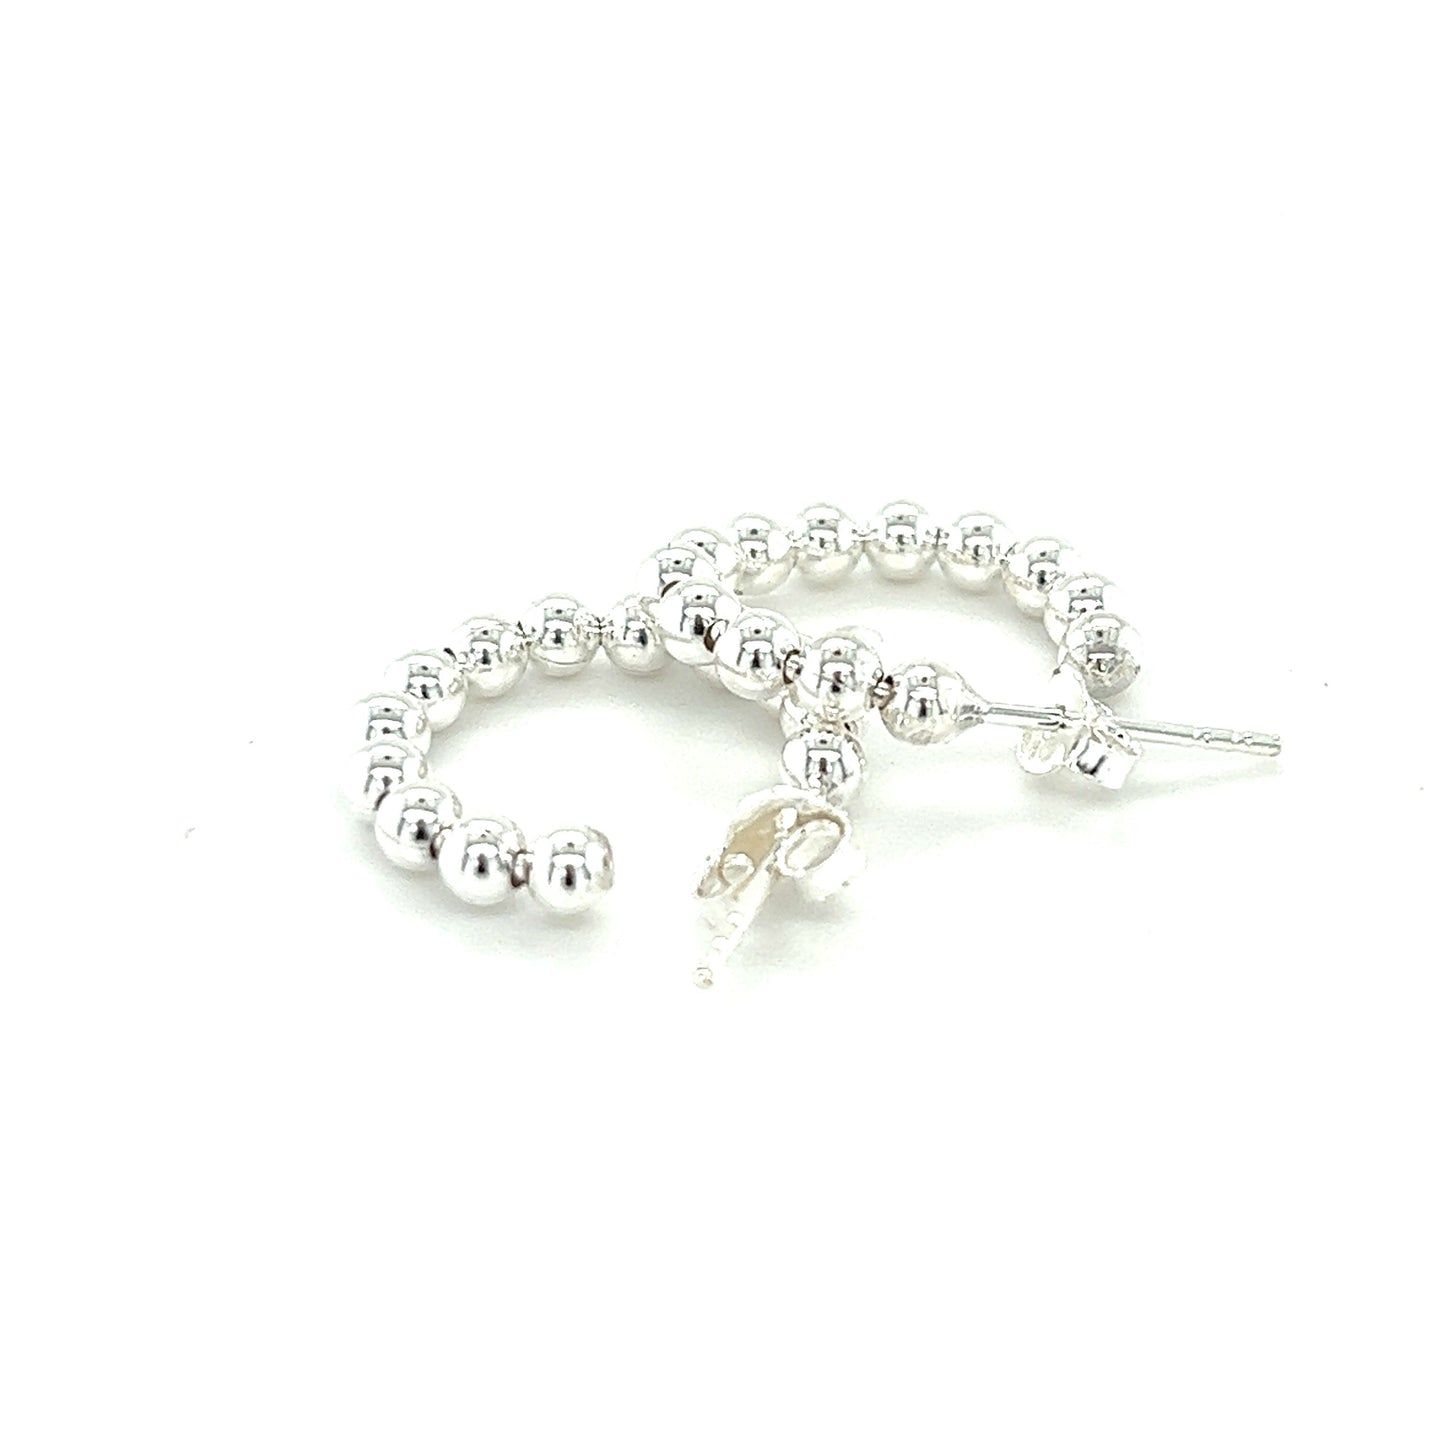 A pair of Delicate Ball Hoops With Post by Super Silver on a white background.